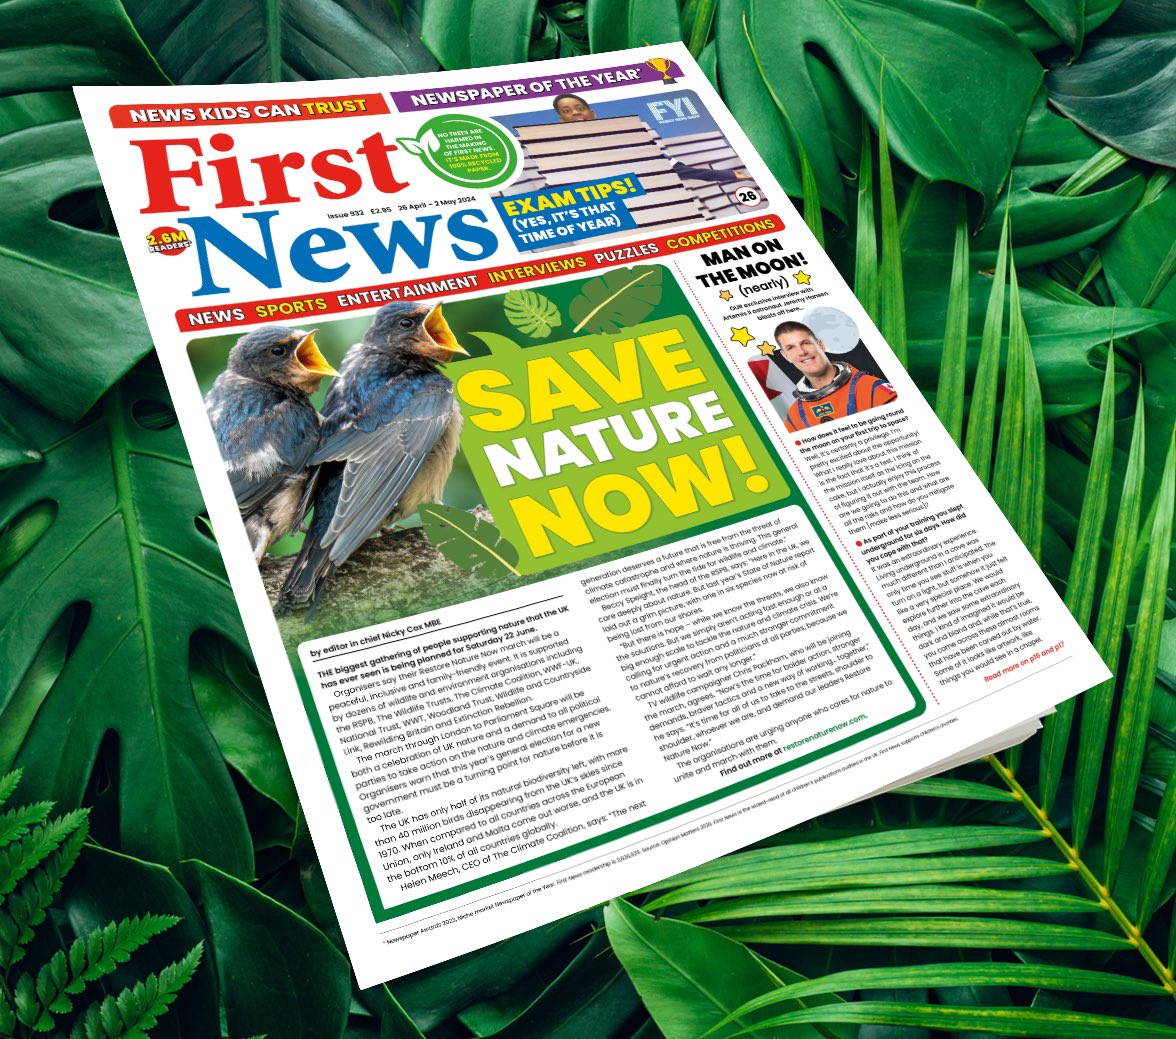 The #RestoreNatureNow march is front page news for @First_News. Nature doesn’t have a voice but kids do! @ChrisGPackham @wwf_uk @TheCCoalition @RSPB_Learning @Natures_Voice @nationaltrust @WWTworldwide @WoodlandTrust @WildlifeTrusts @RewildingB @XRLondon @WCL_News